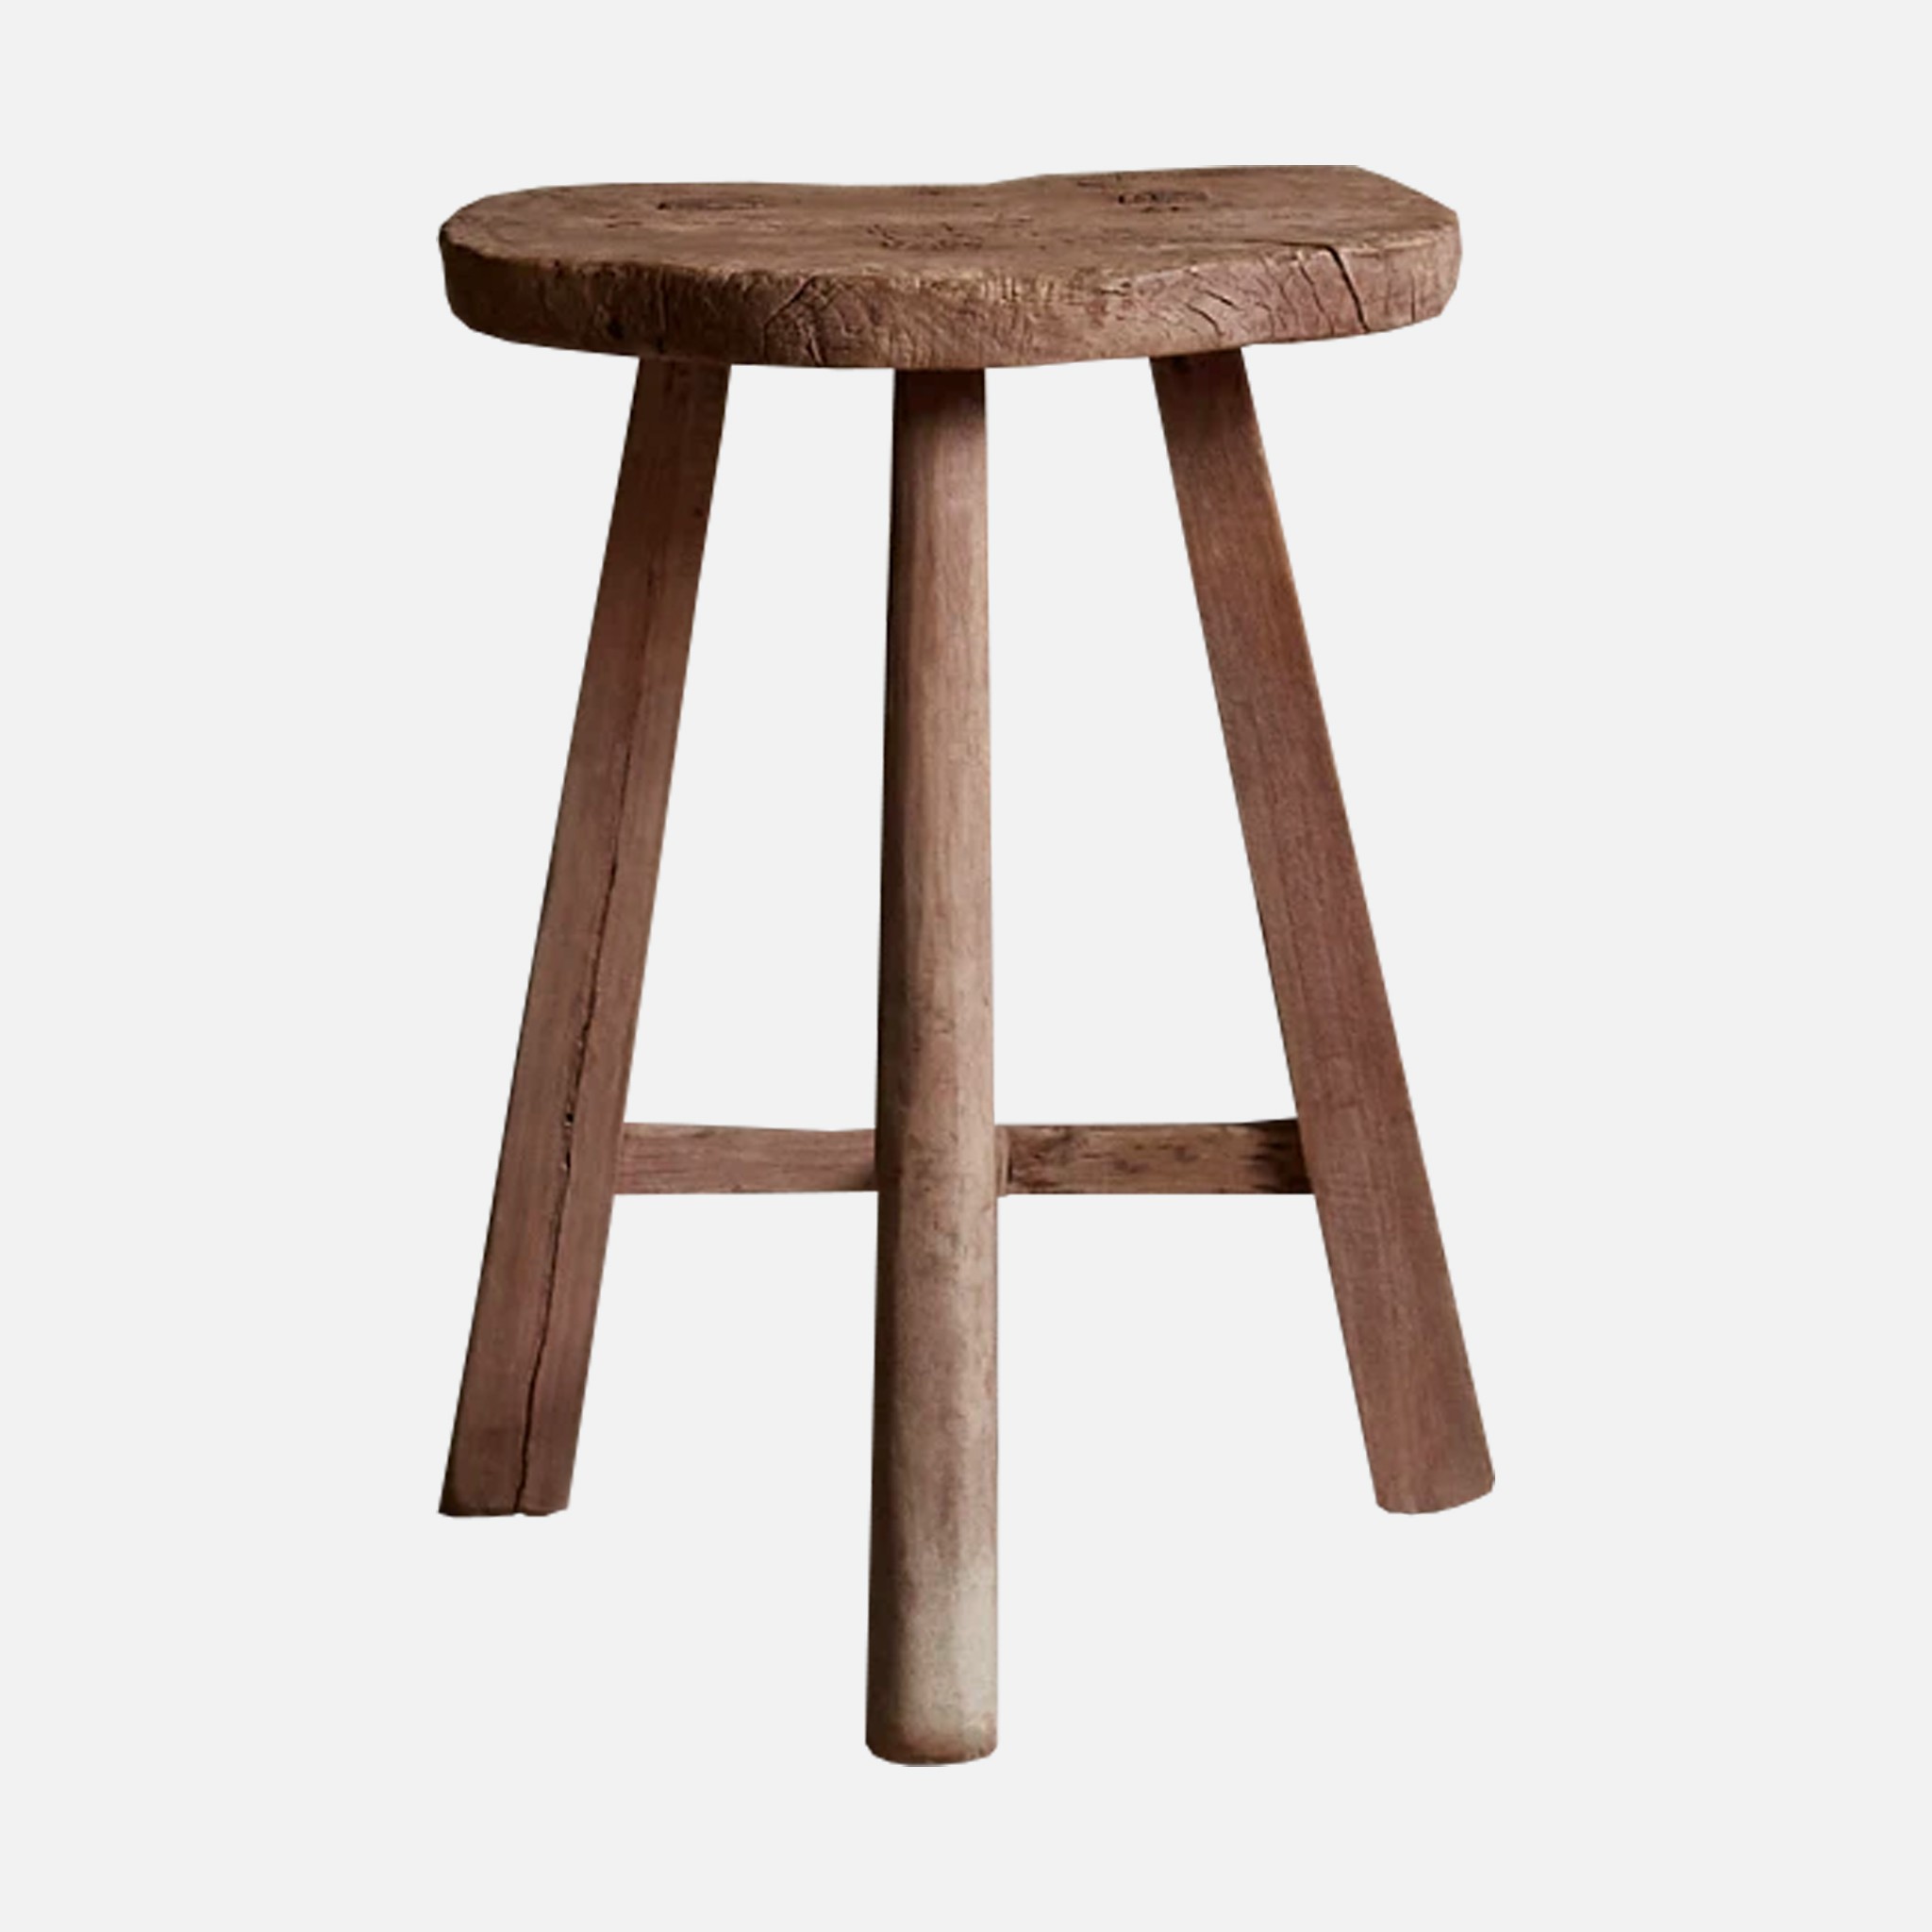 The image of an The Expert Vintage Elmwood and Pinewood Stool product